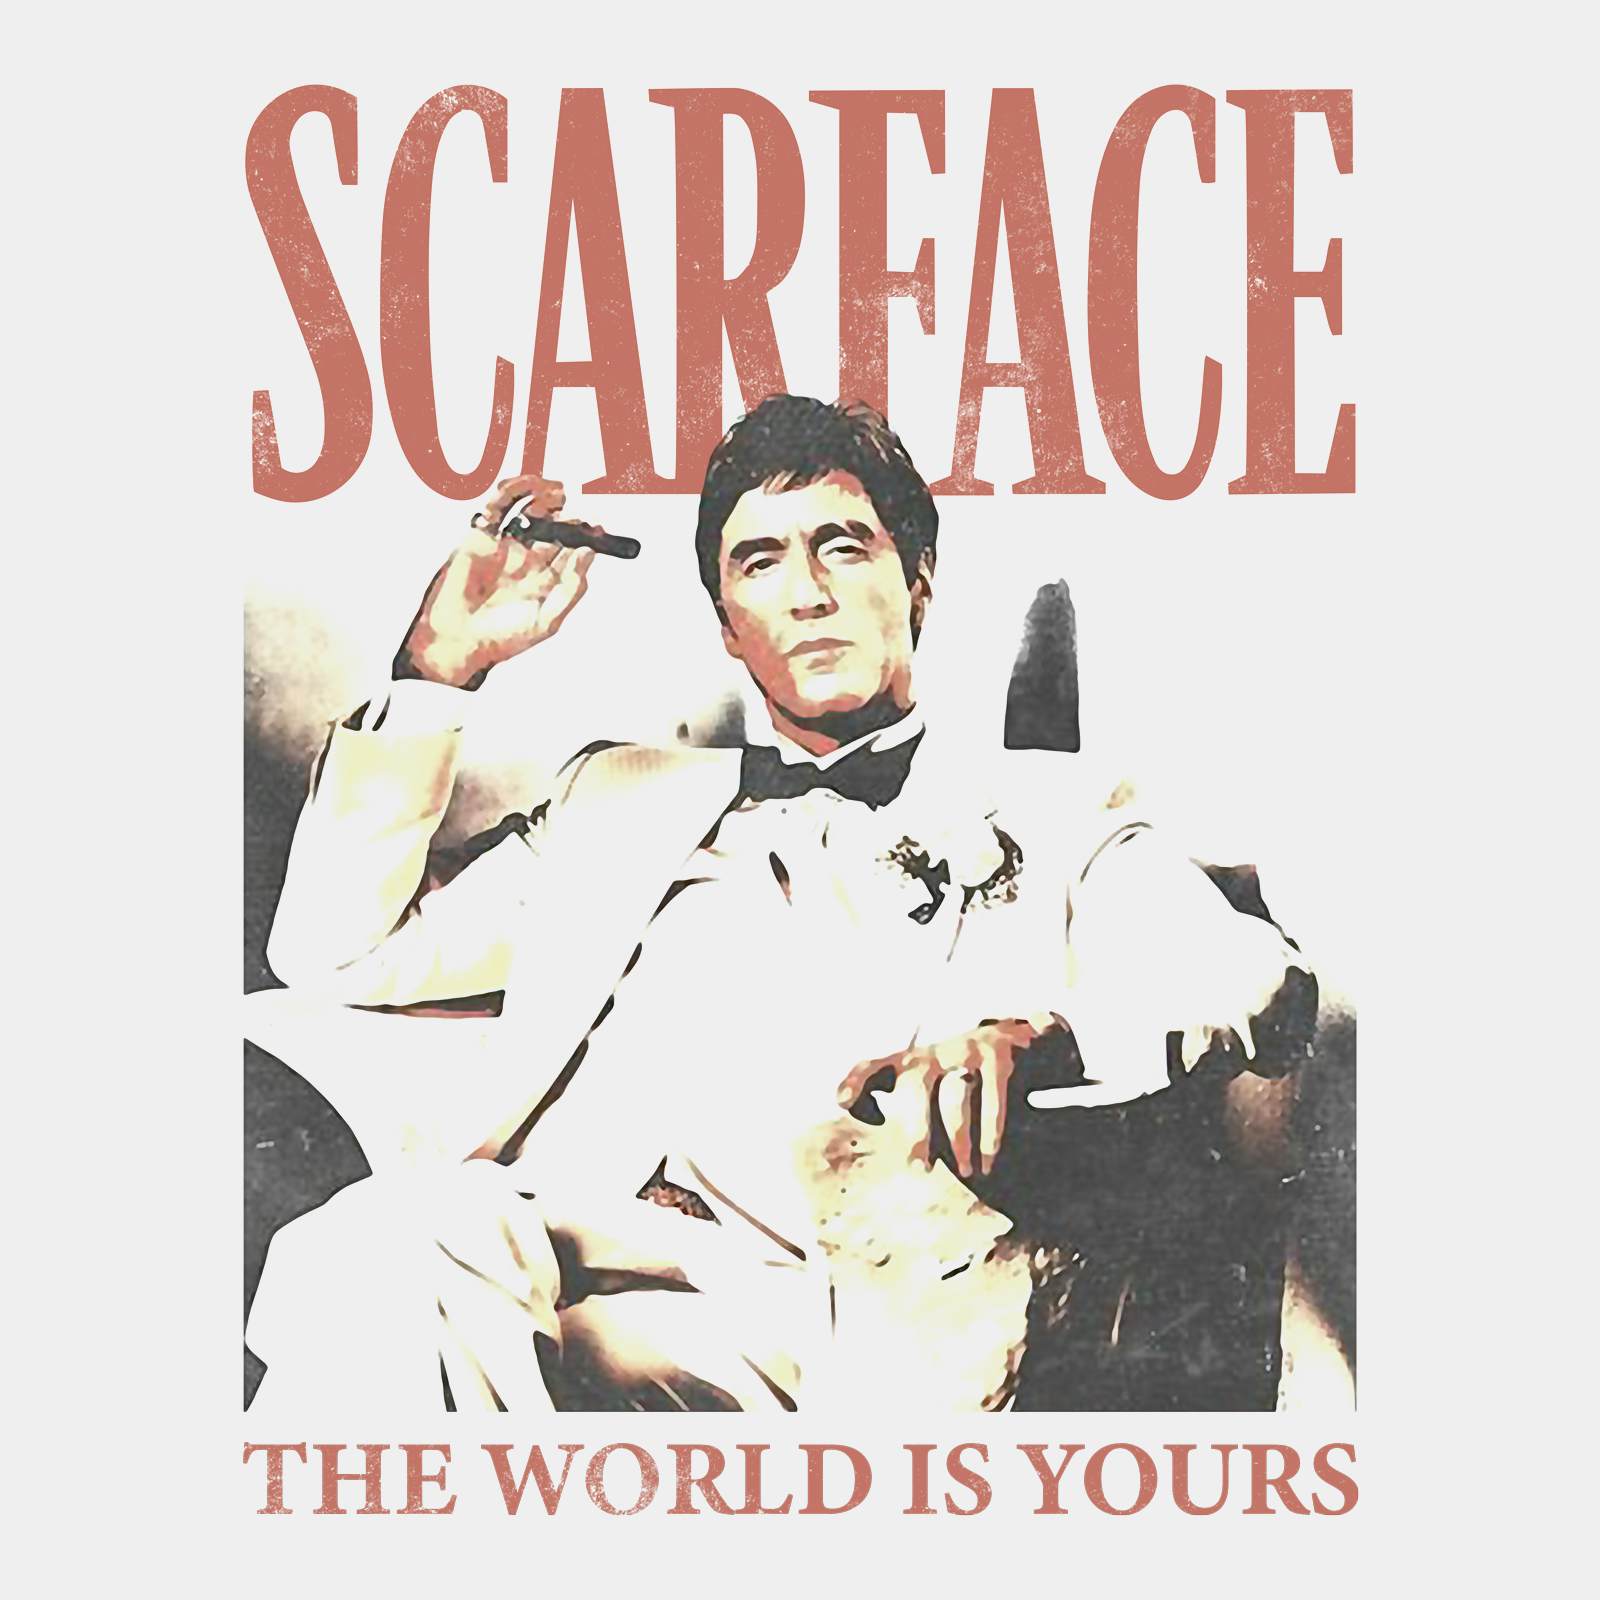 scarface the world is yours movie